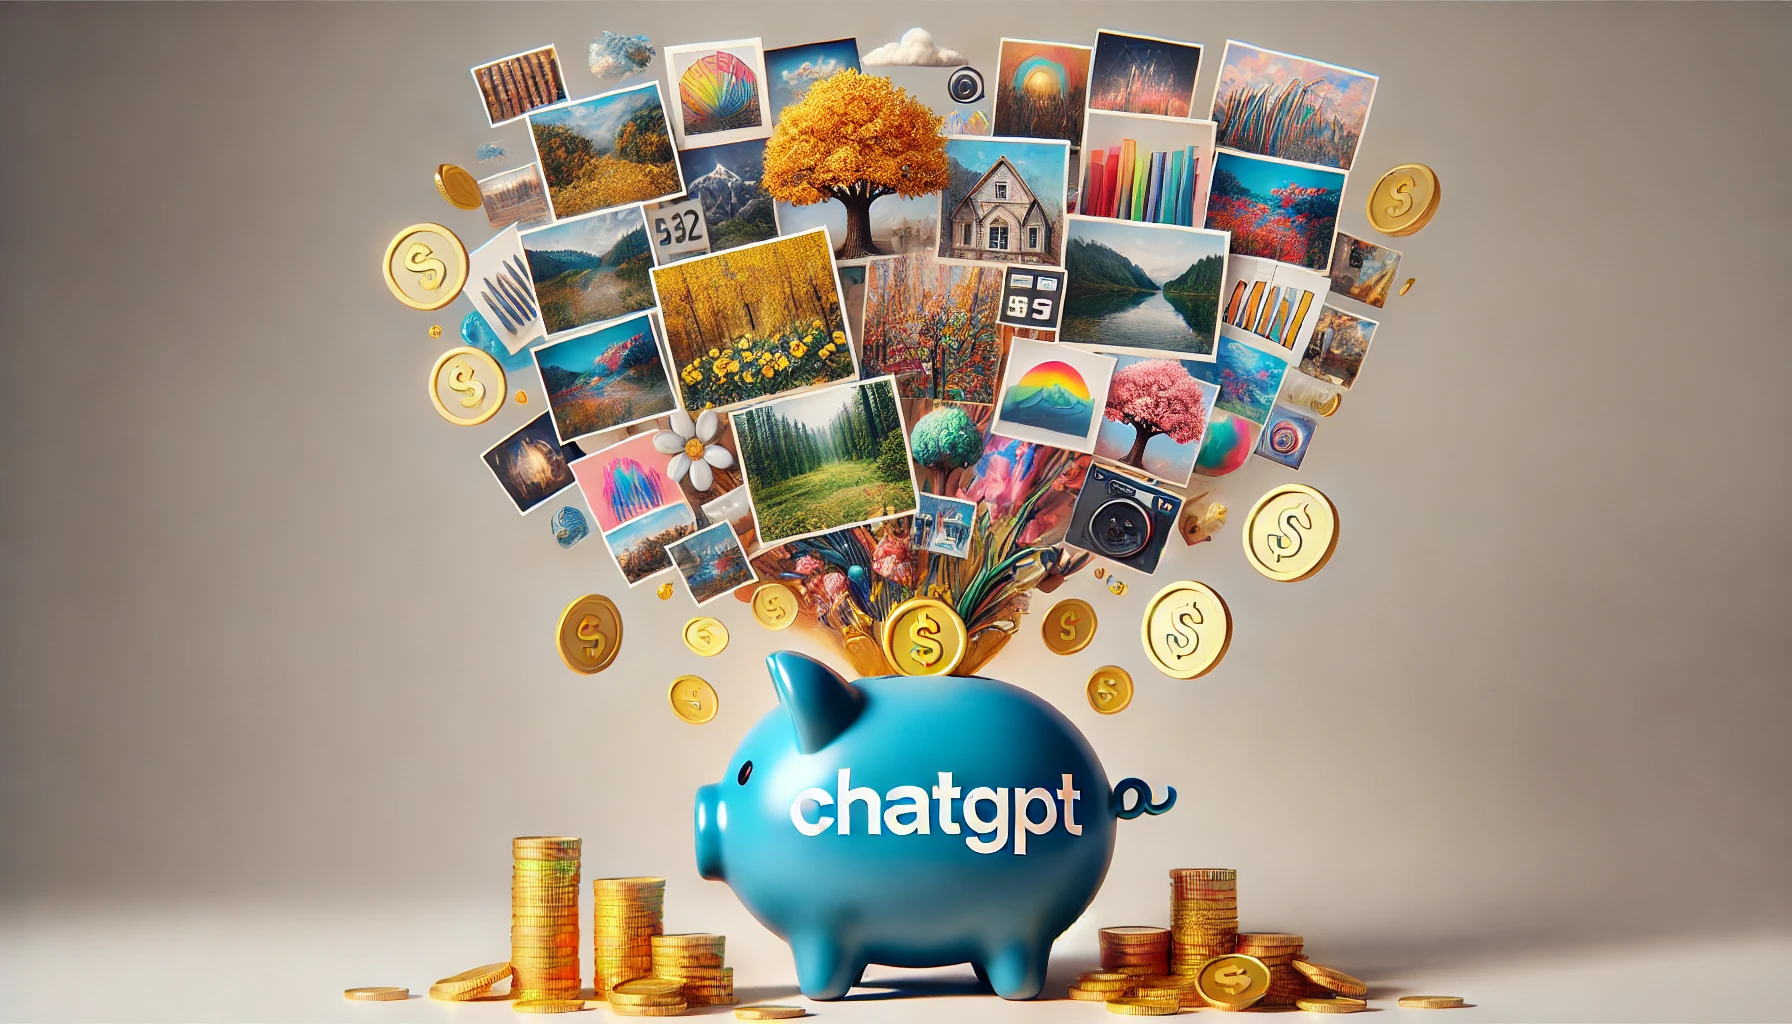 ChatGPT image generator piggy bank overflowing with gold coins and various images bursting out of the top.